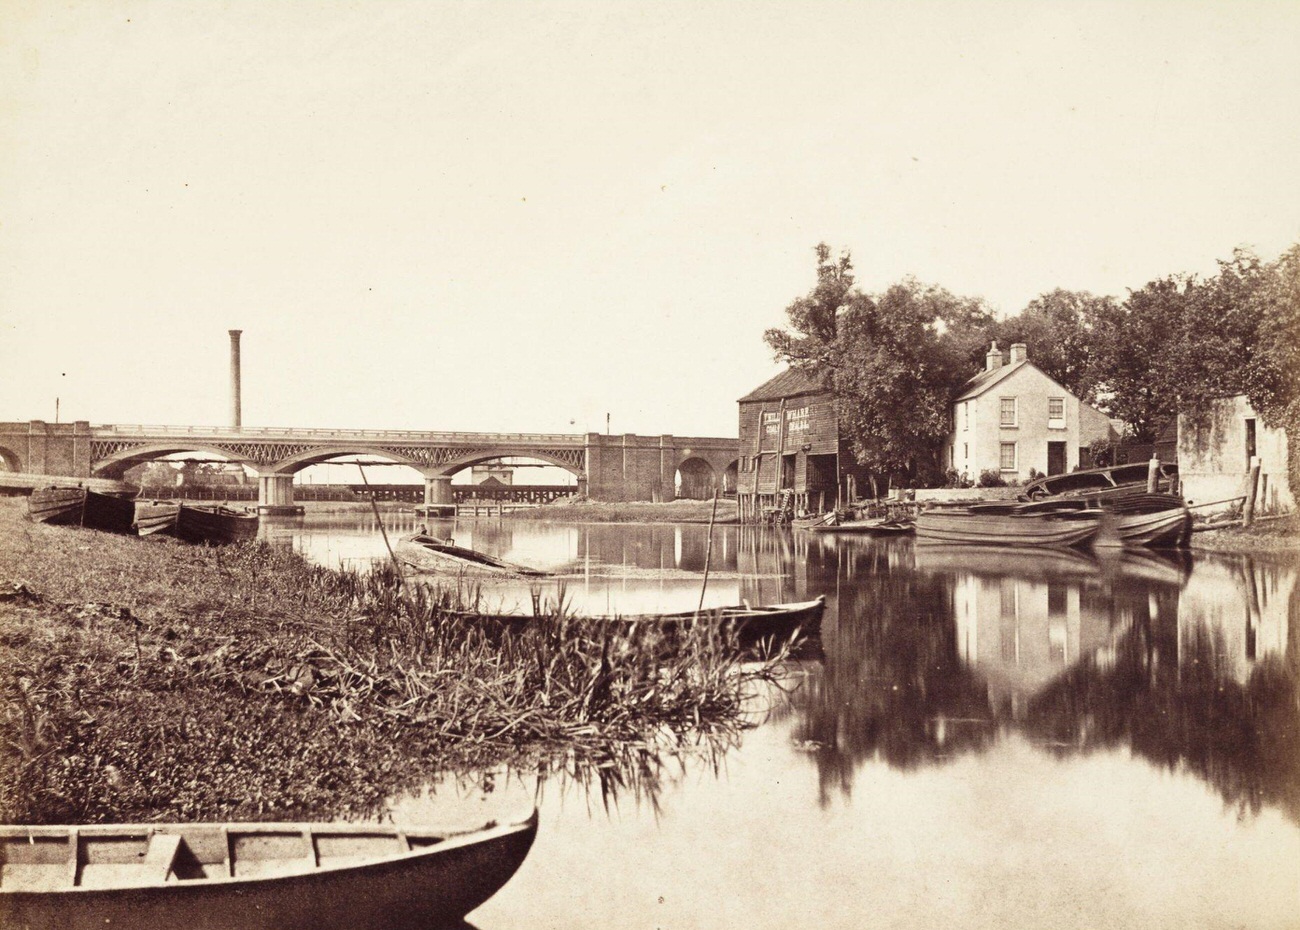 Boats moored on a river, circa 1855, by Samuel Smith.